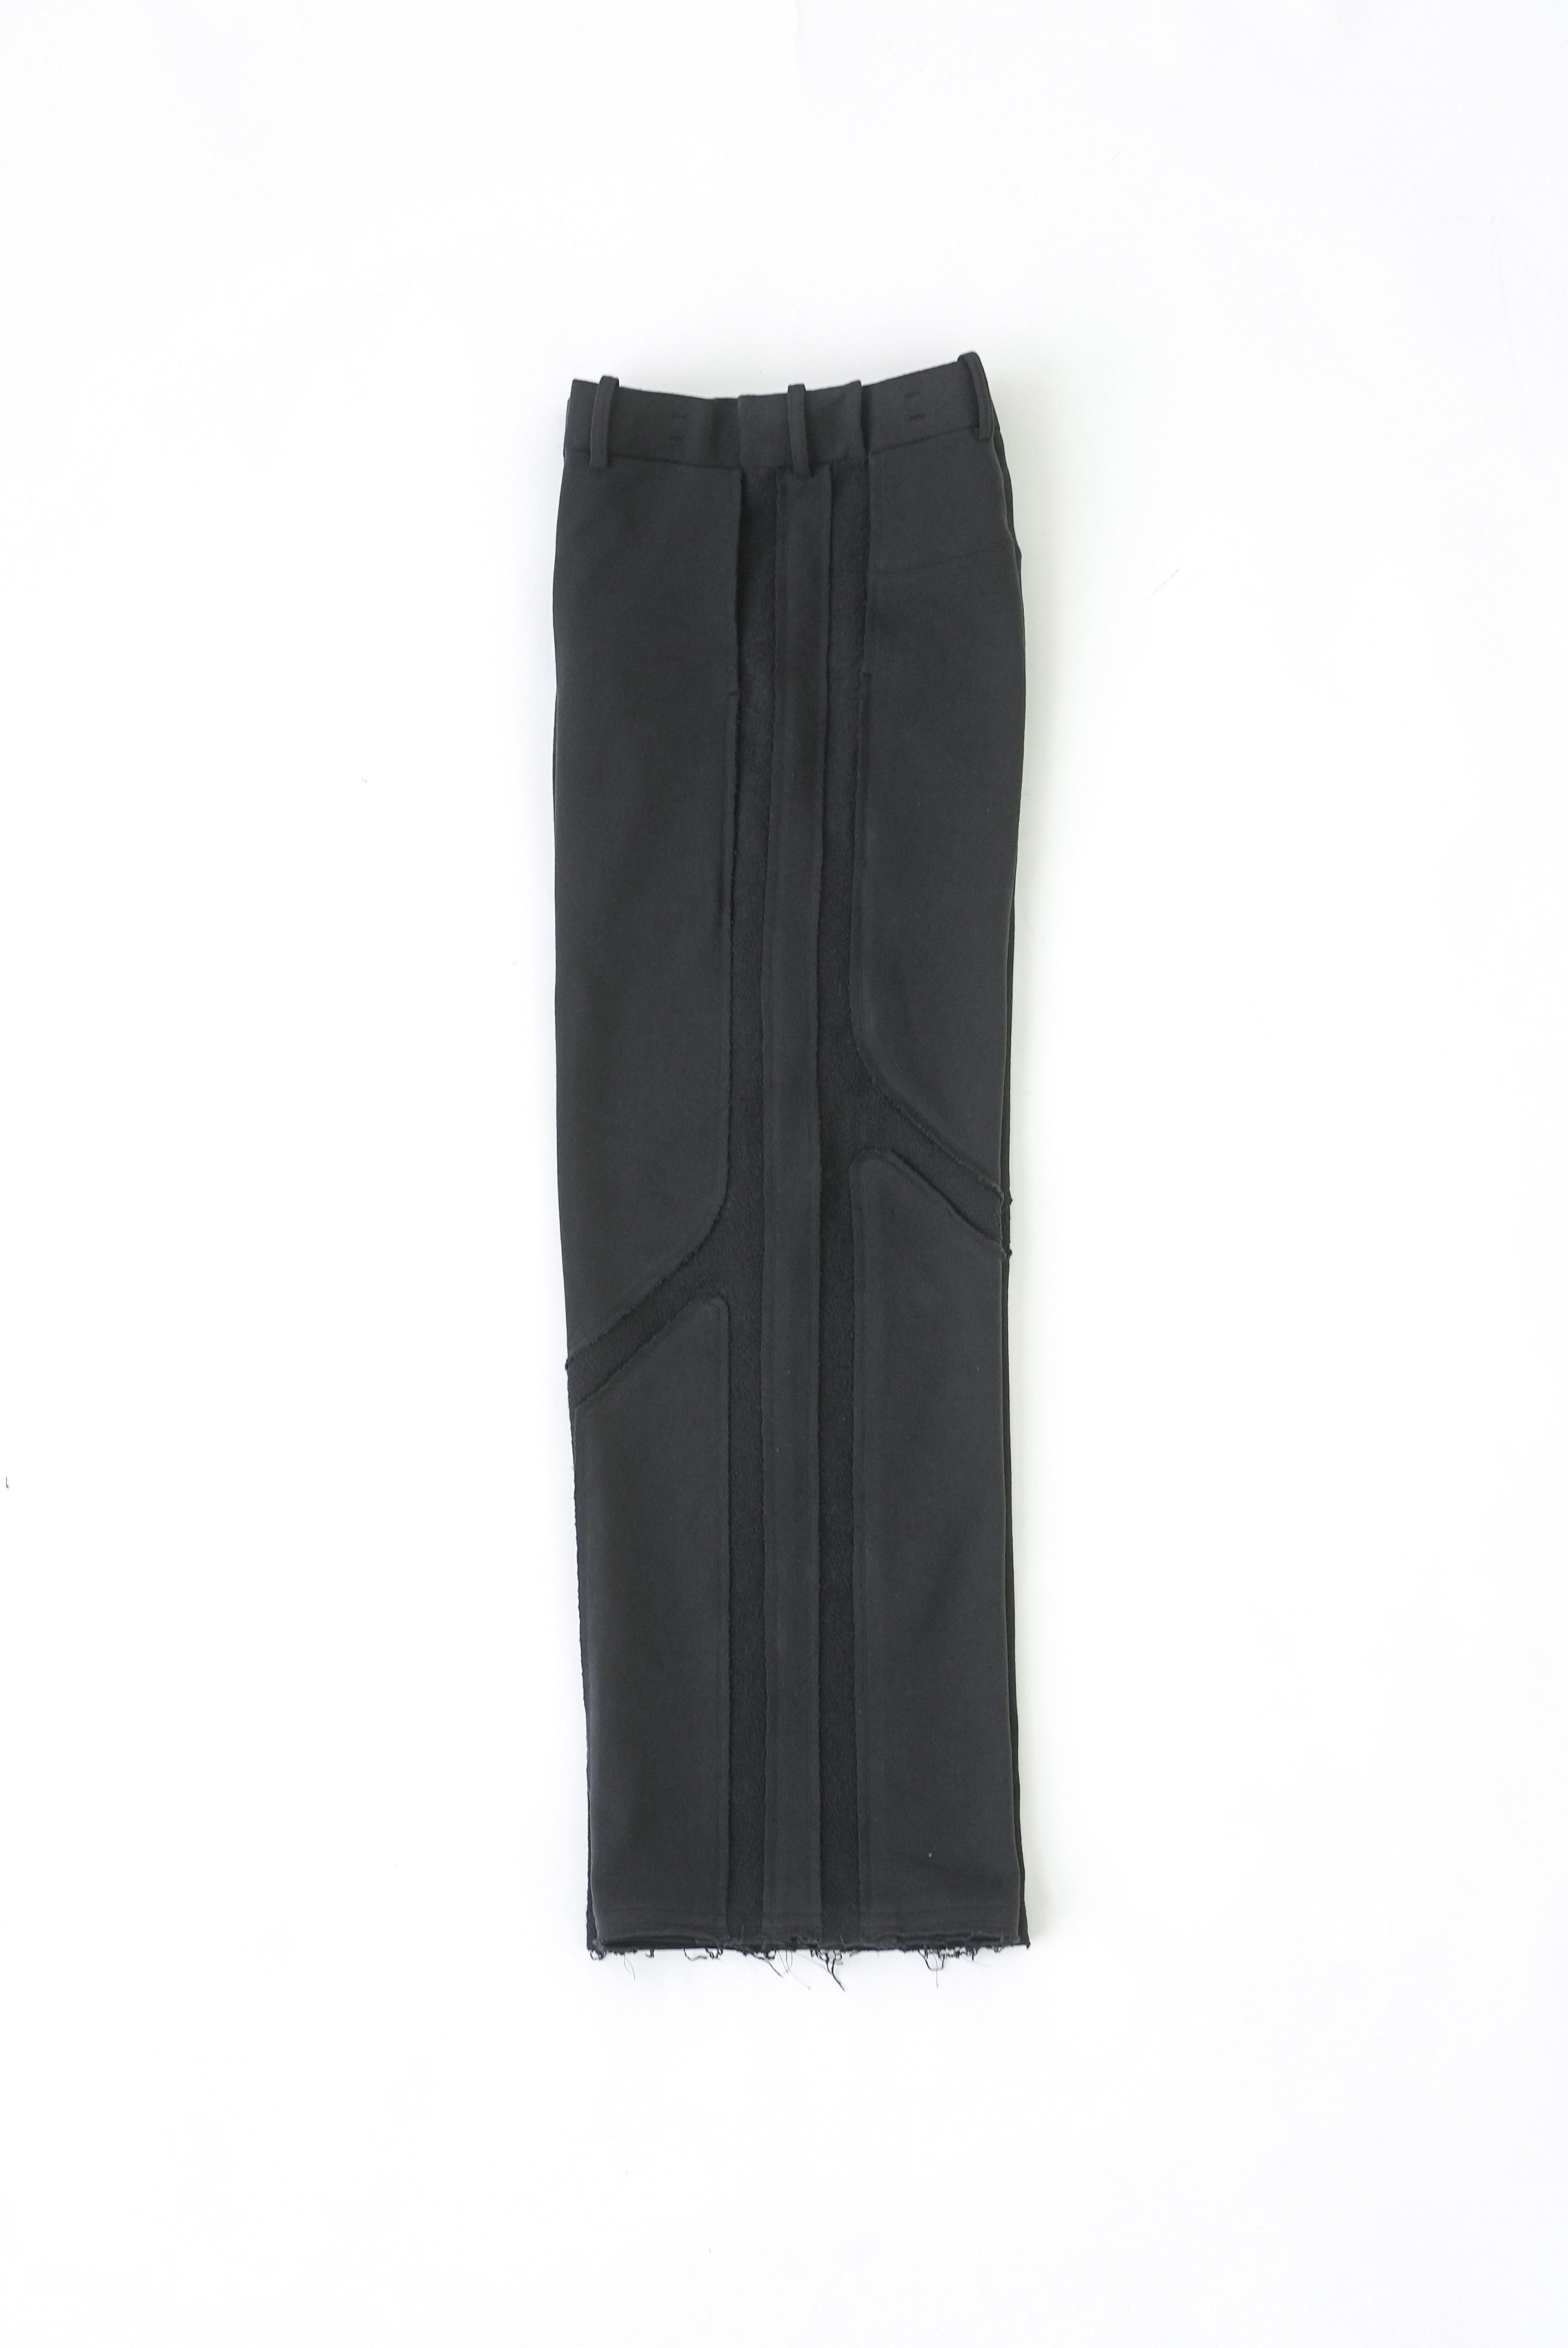 STRONG 004 TROUSERS BLACK 46 OUR's - fawema.org